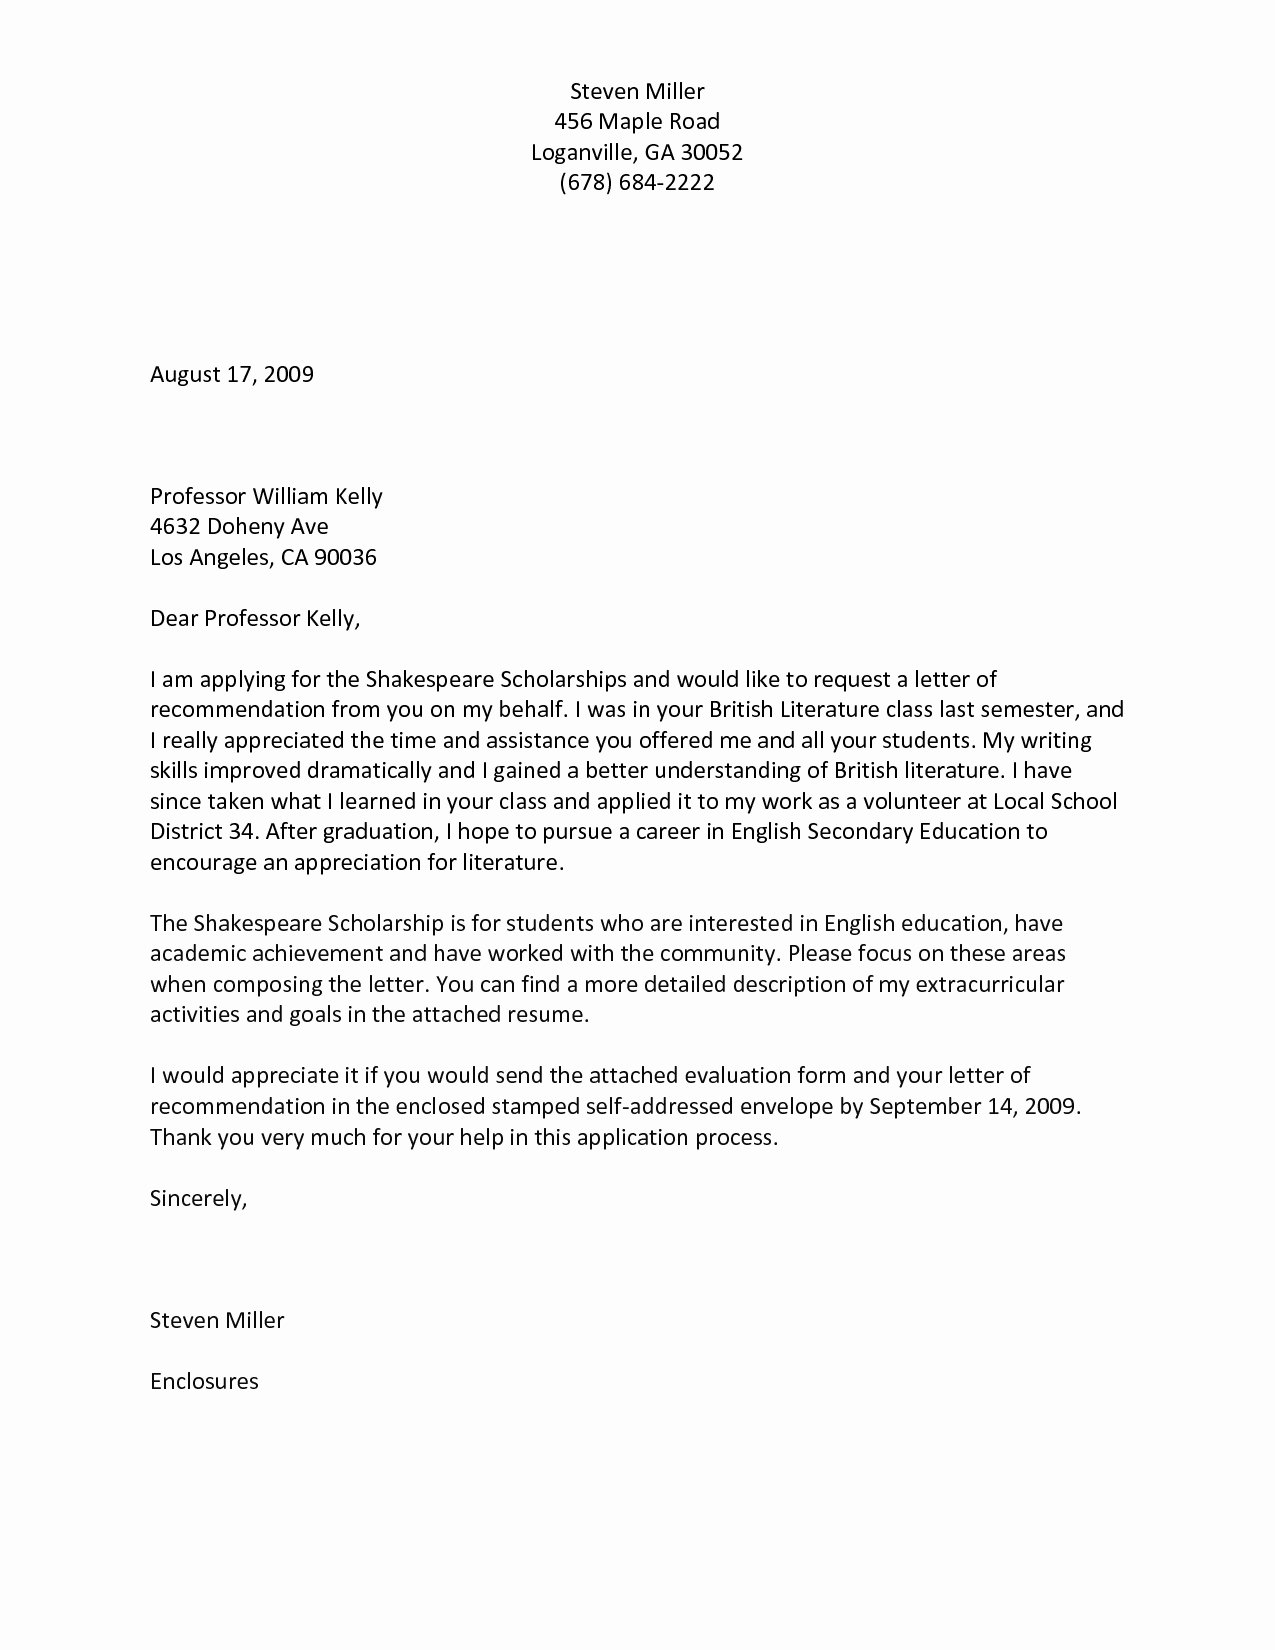 Letter Of Recommendation Request Example Lovely Letter Re Mendation Request Template Examples